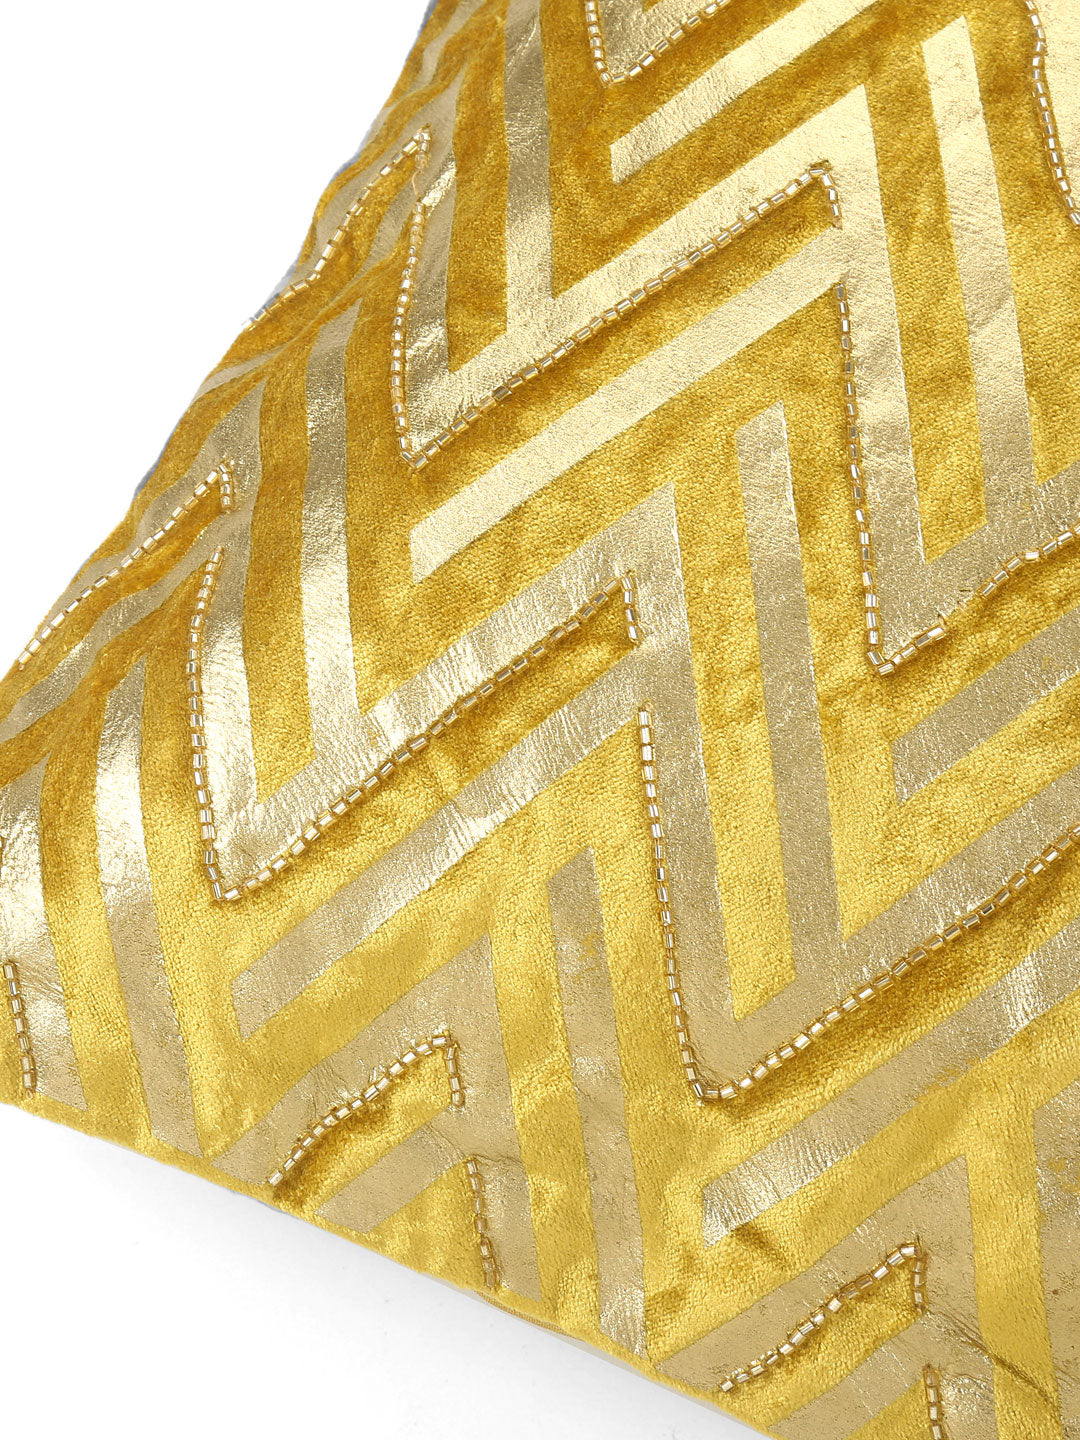 Foil Scroll Cushion Covers (Yellow)